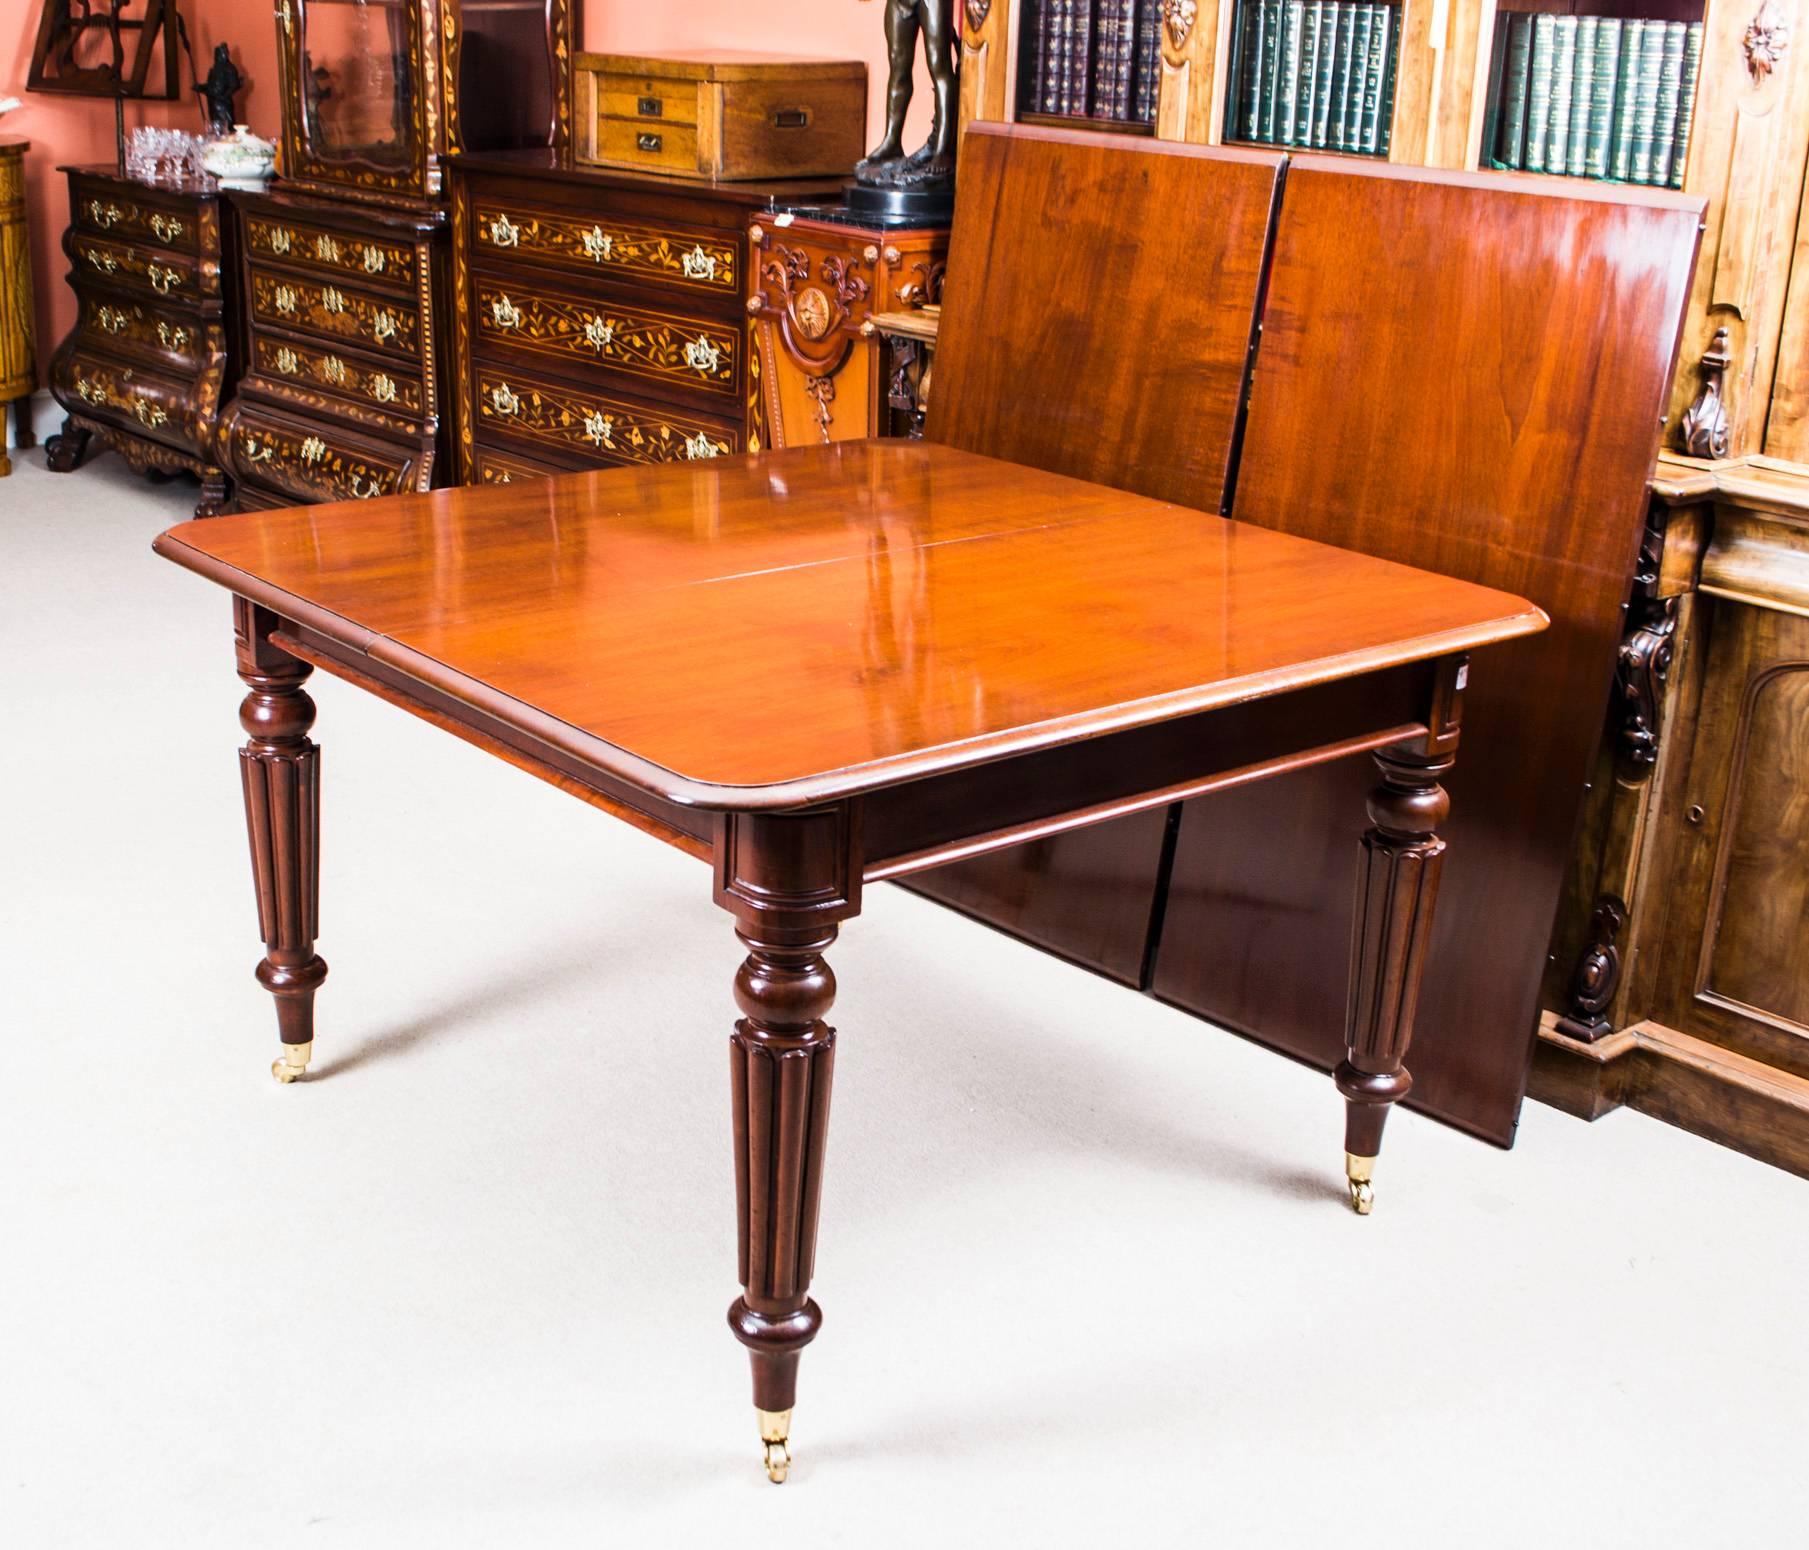 Early 19th Century Antique Regency Mahogany Dining Table Manner of Gillows, circa 1820